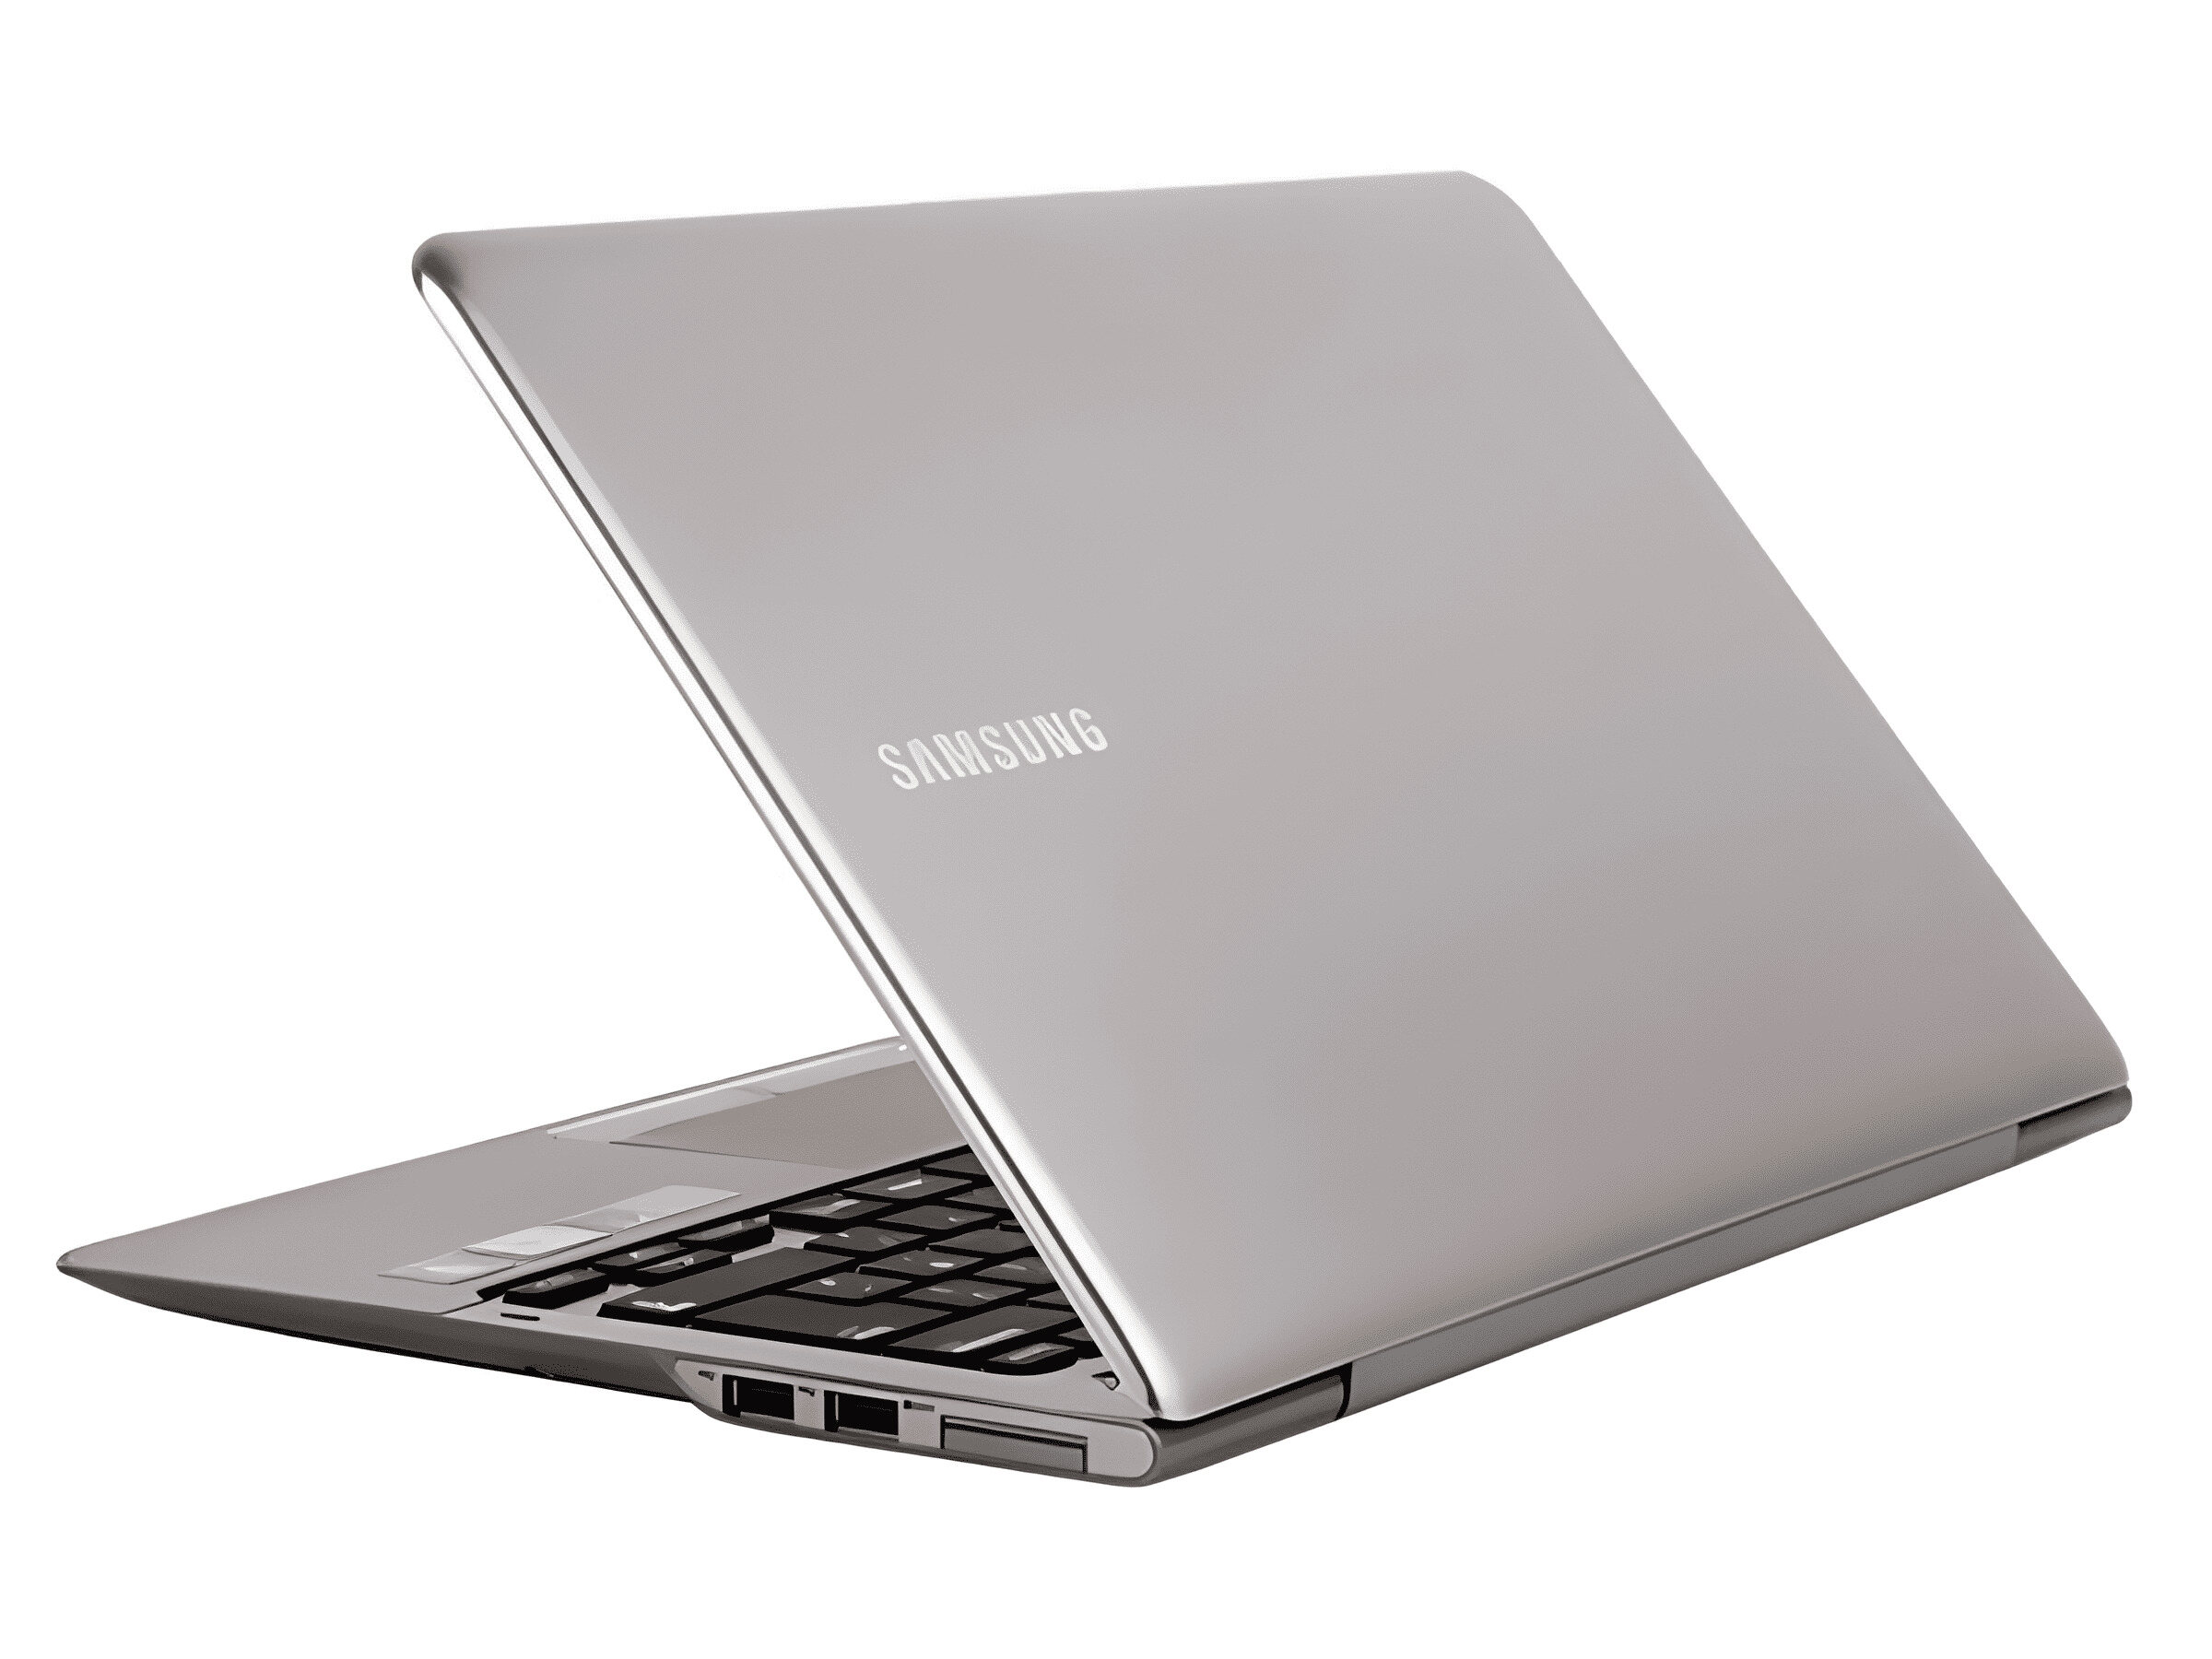 How To Find Out Which Samsung Ultrabook I Have